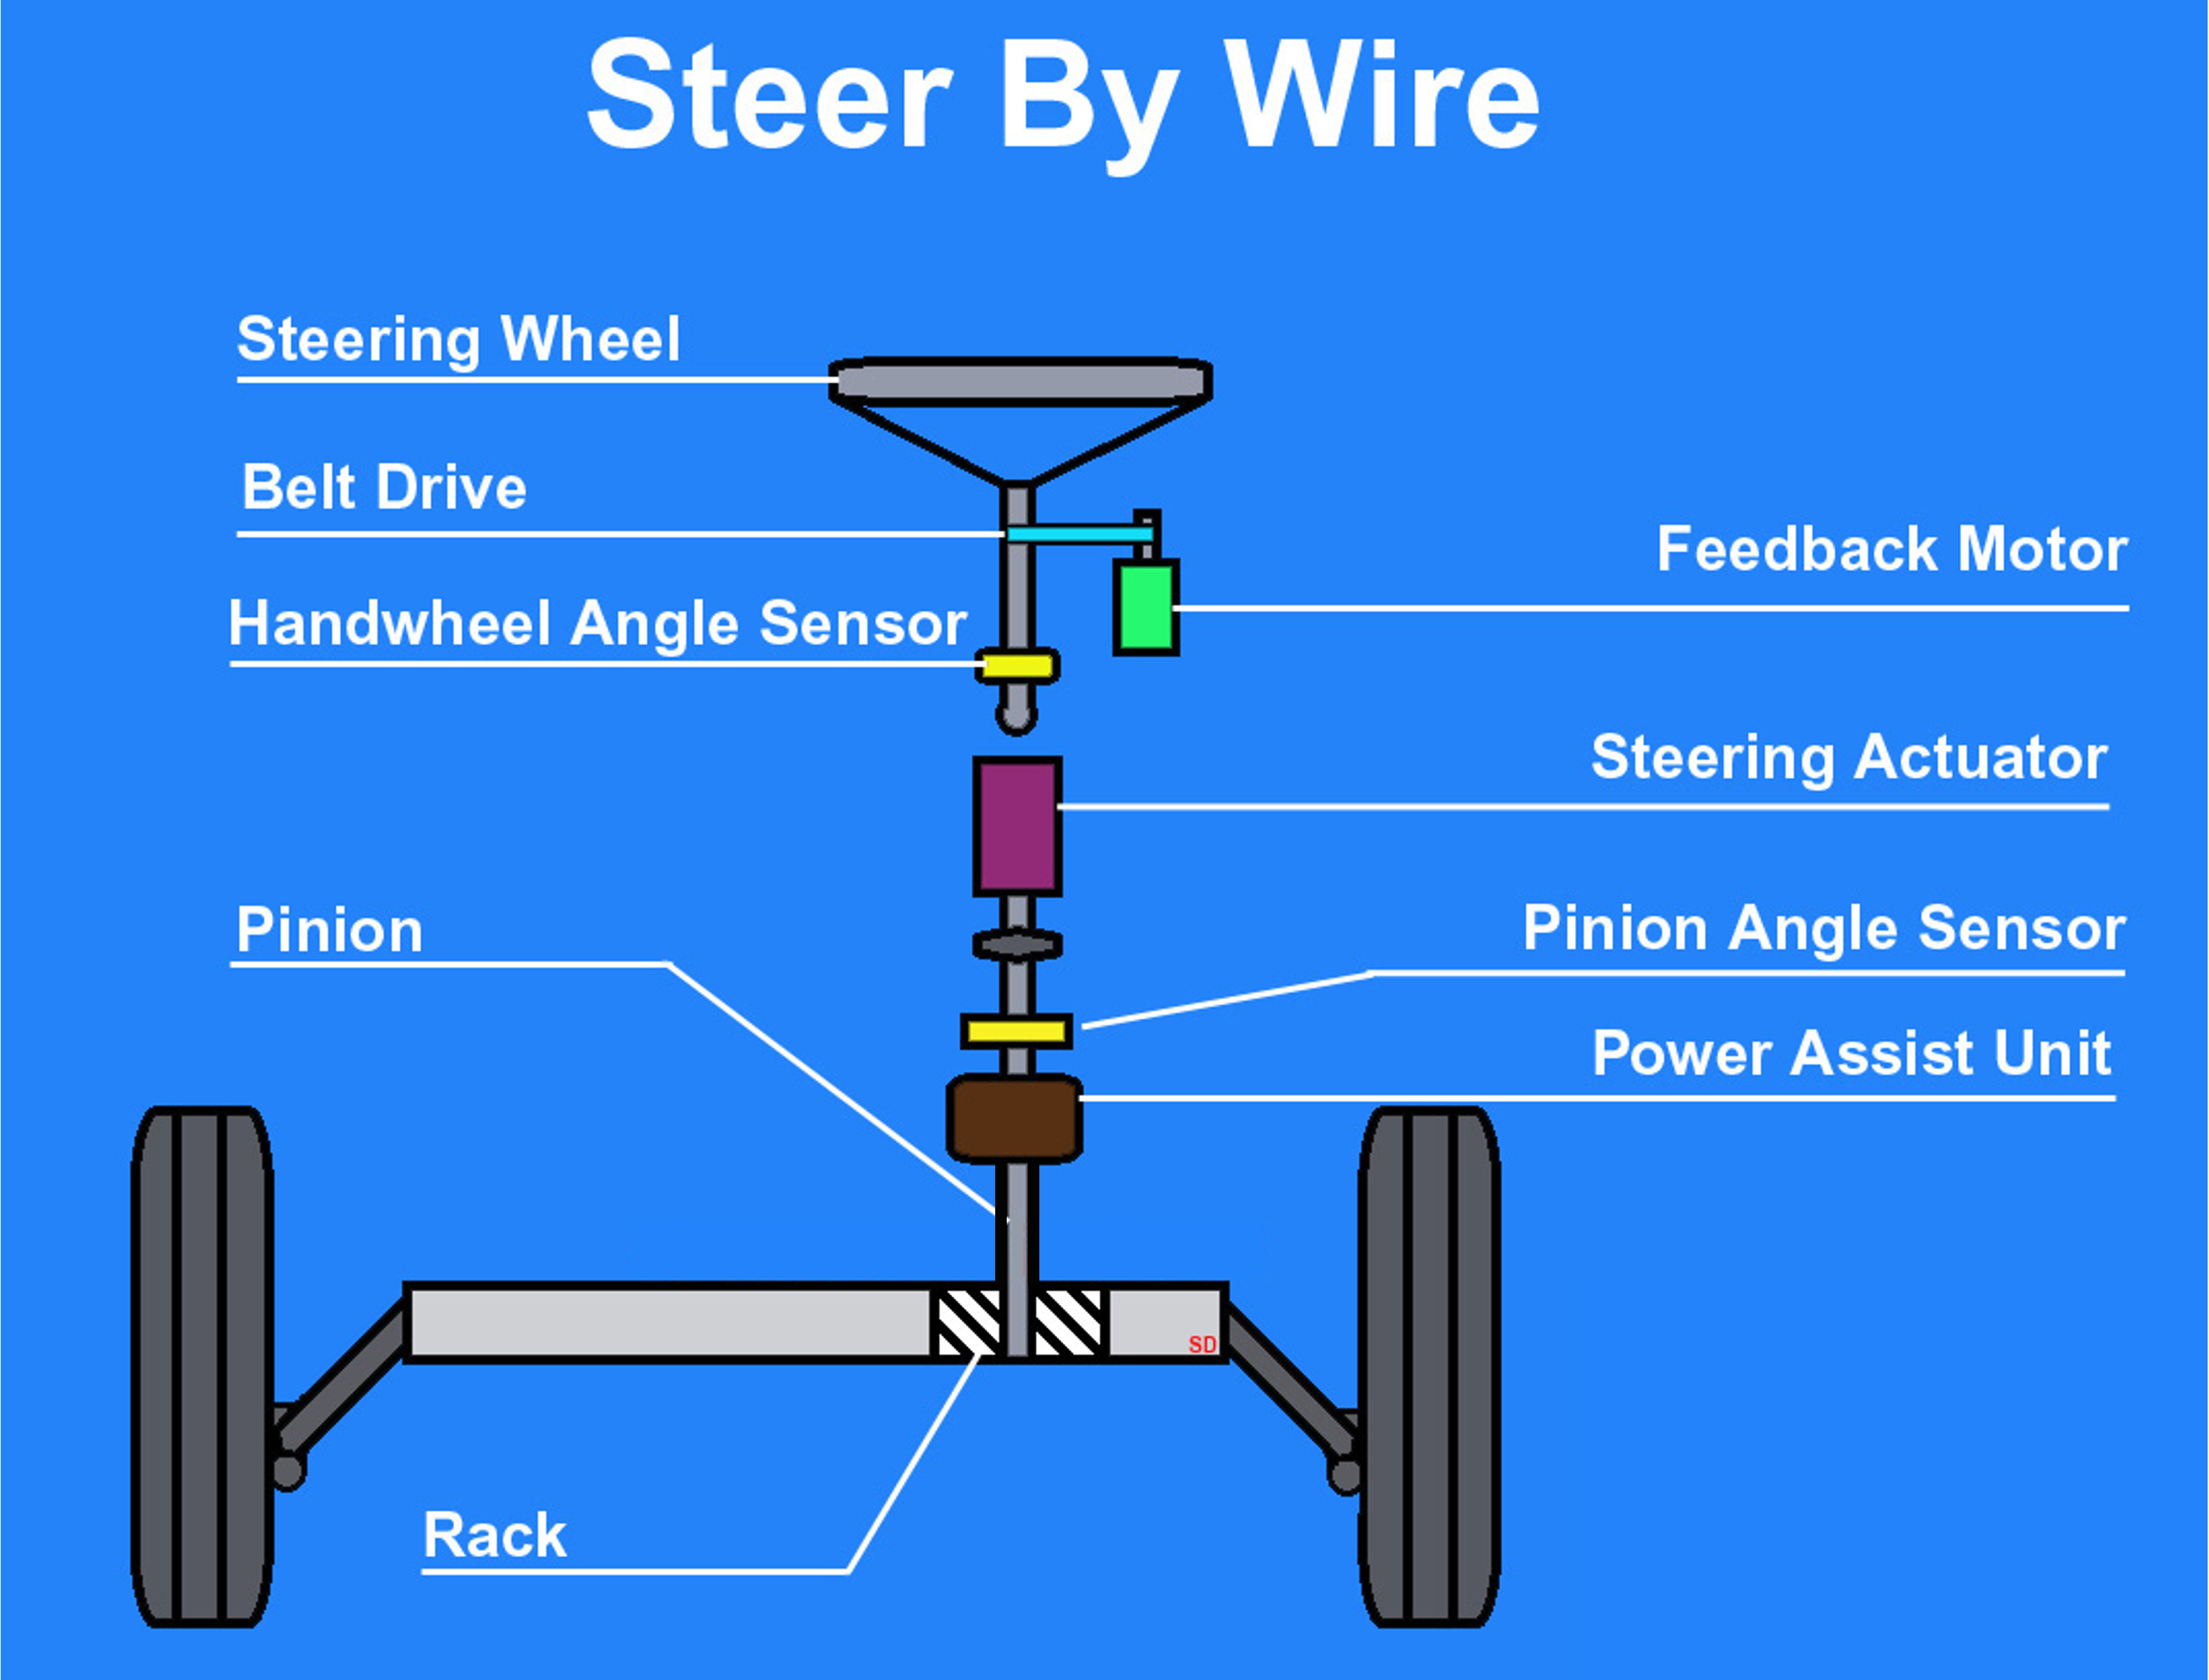 Steer-by-wire Outline